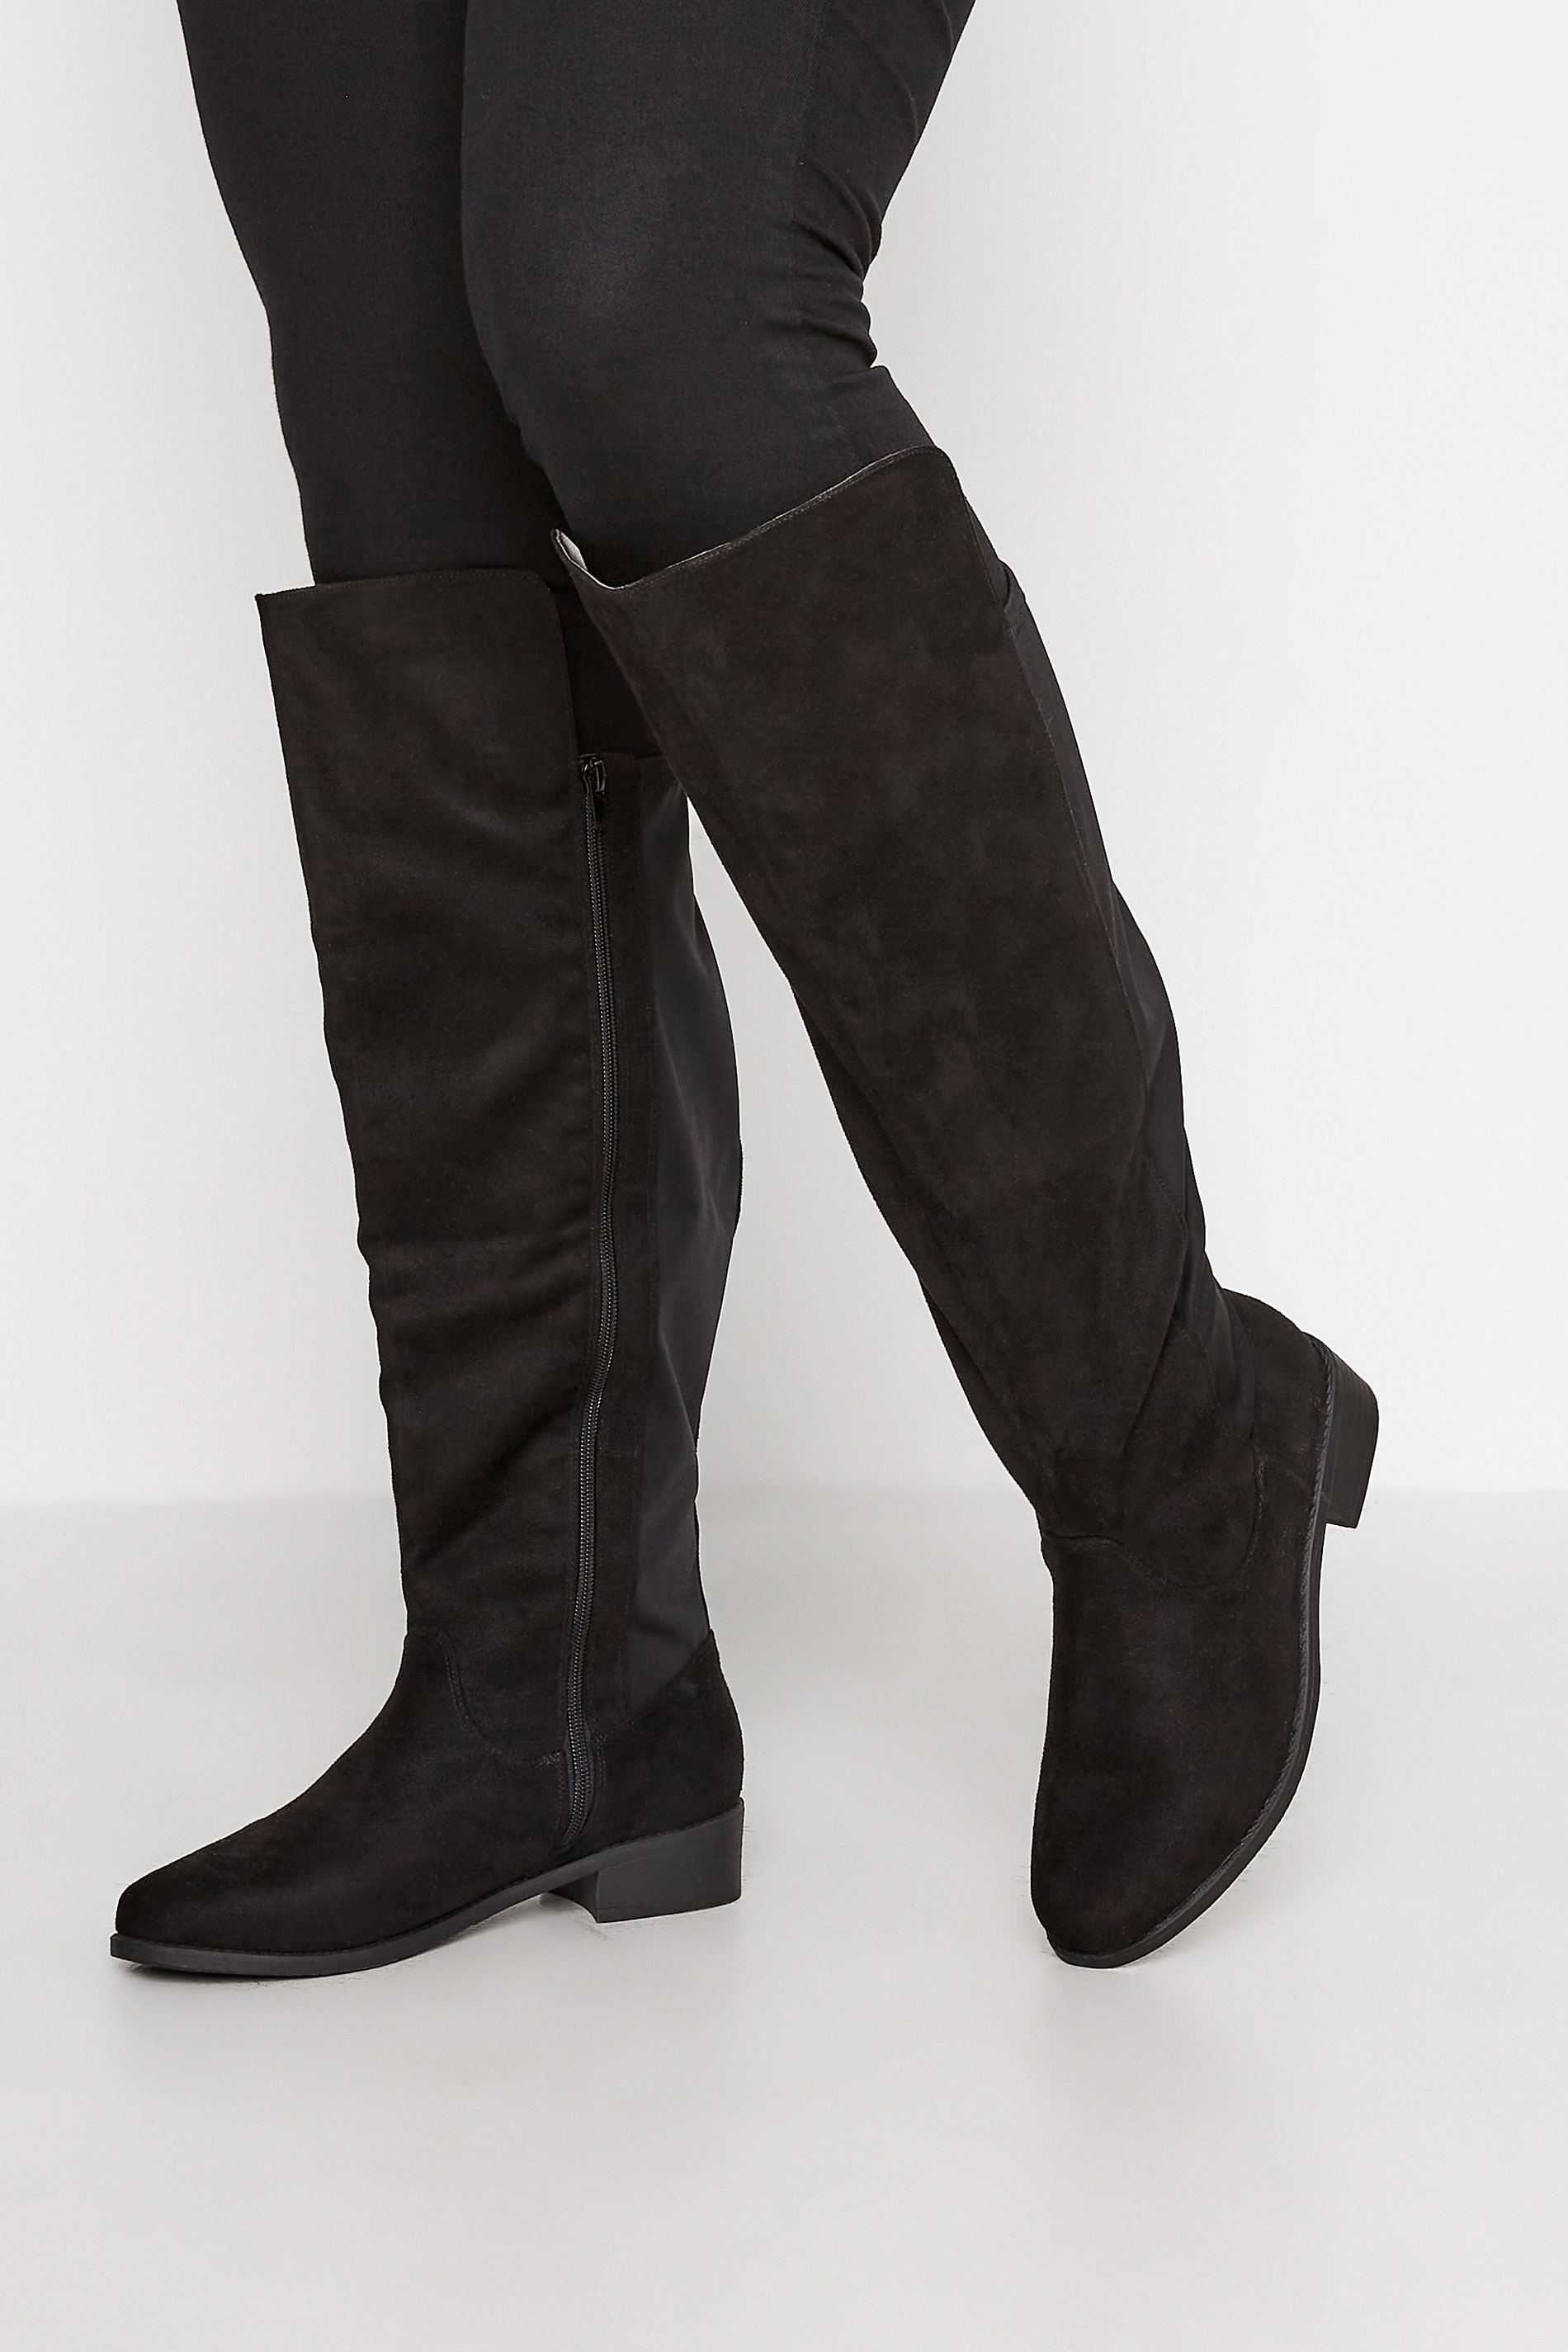 Black Suede Stretch Over The Knee Boots In Extra Wide EEE Fit 1